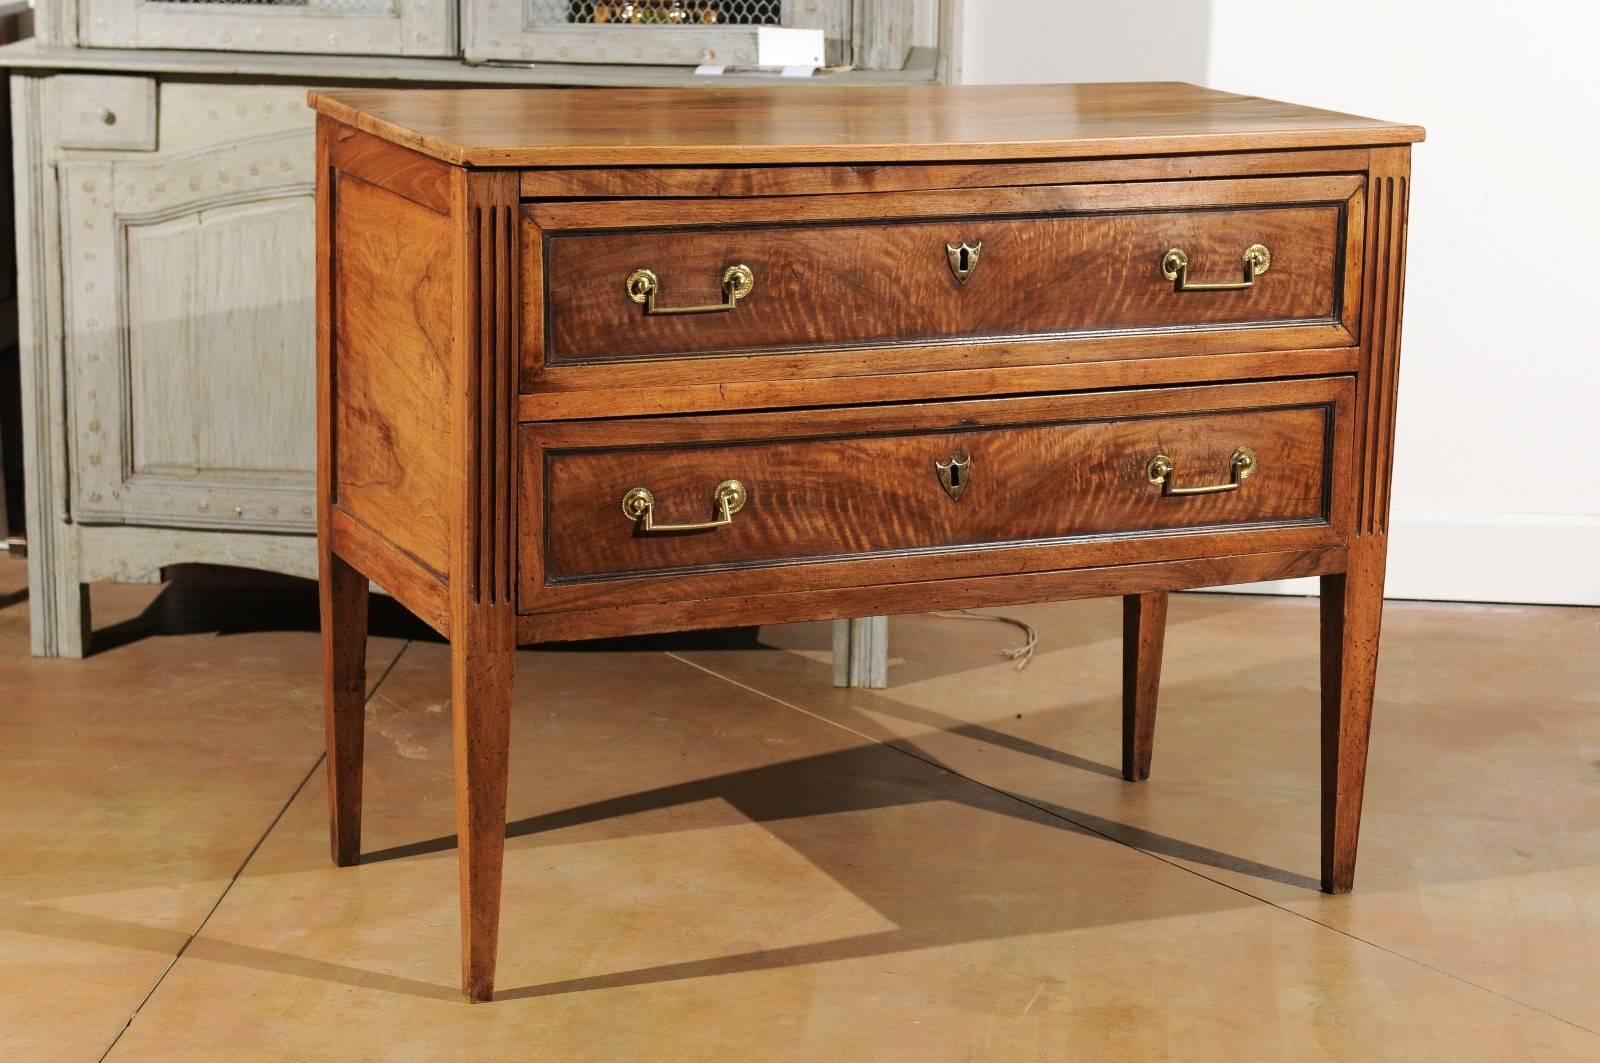 A French Louis XVI period two-drawer walnut commode from the third quarter of the 18th century, with fluted side posts and tapered legs. This French walnut commode features a rectangular planked top sitting above two dovetailed drawers. Each drawer